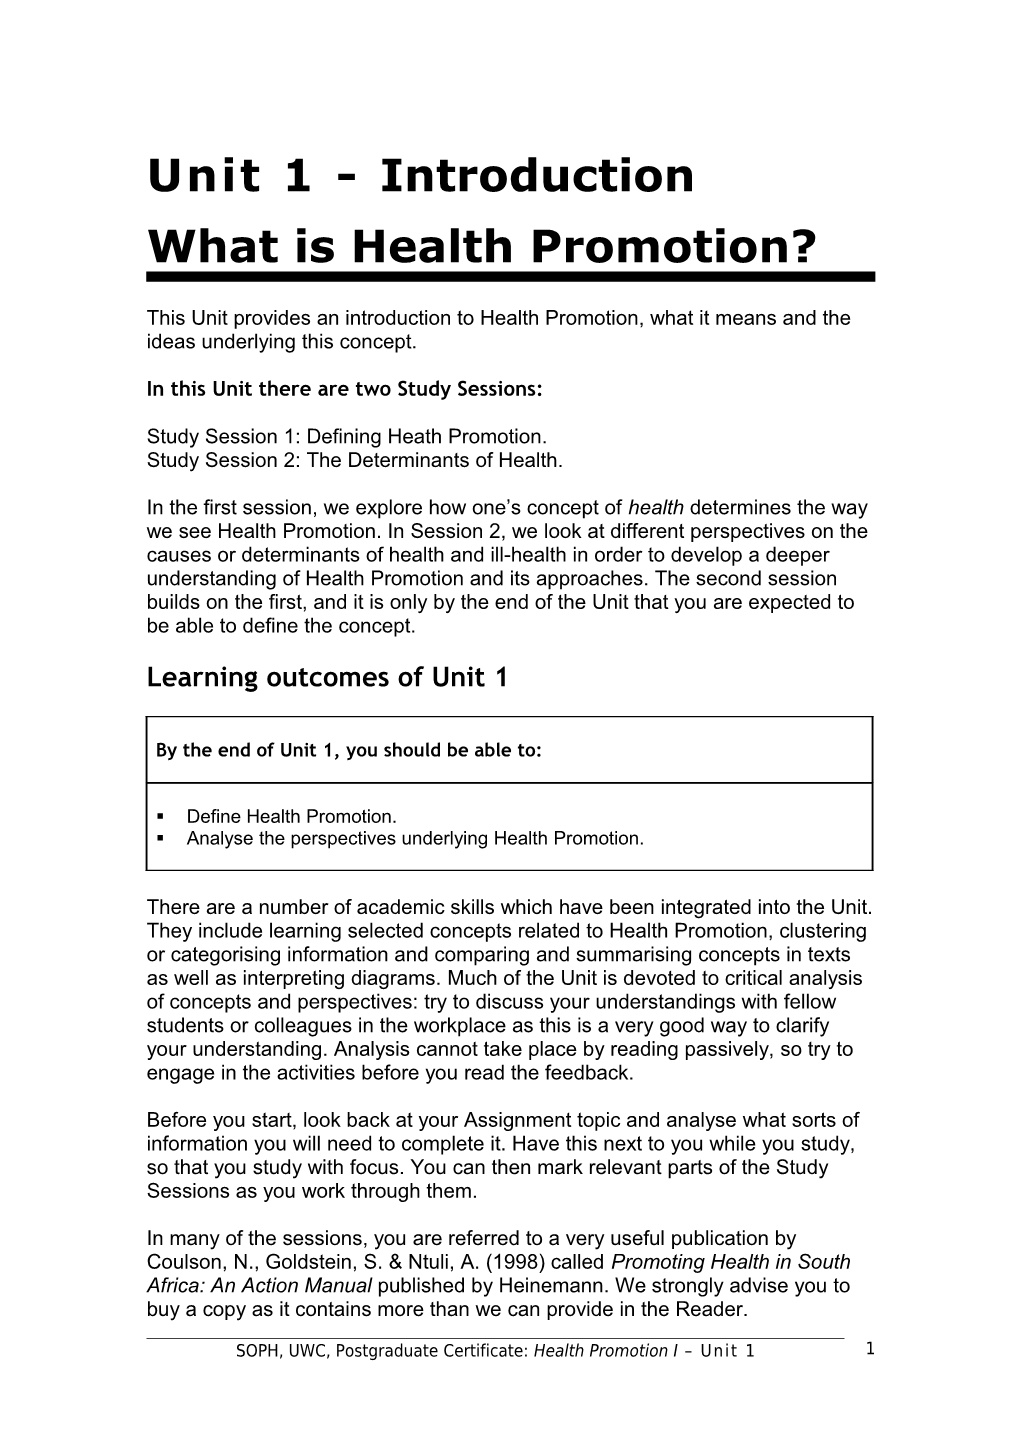 Unit 1 What Is Health Promotion